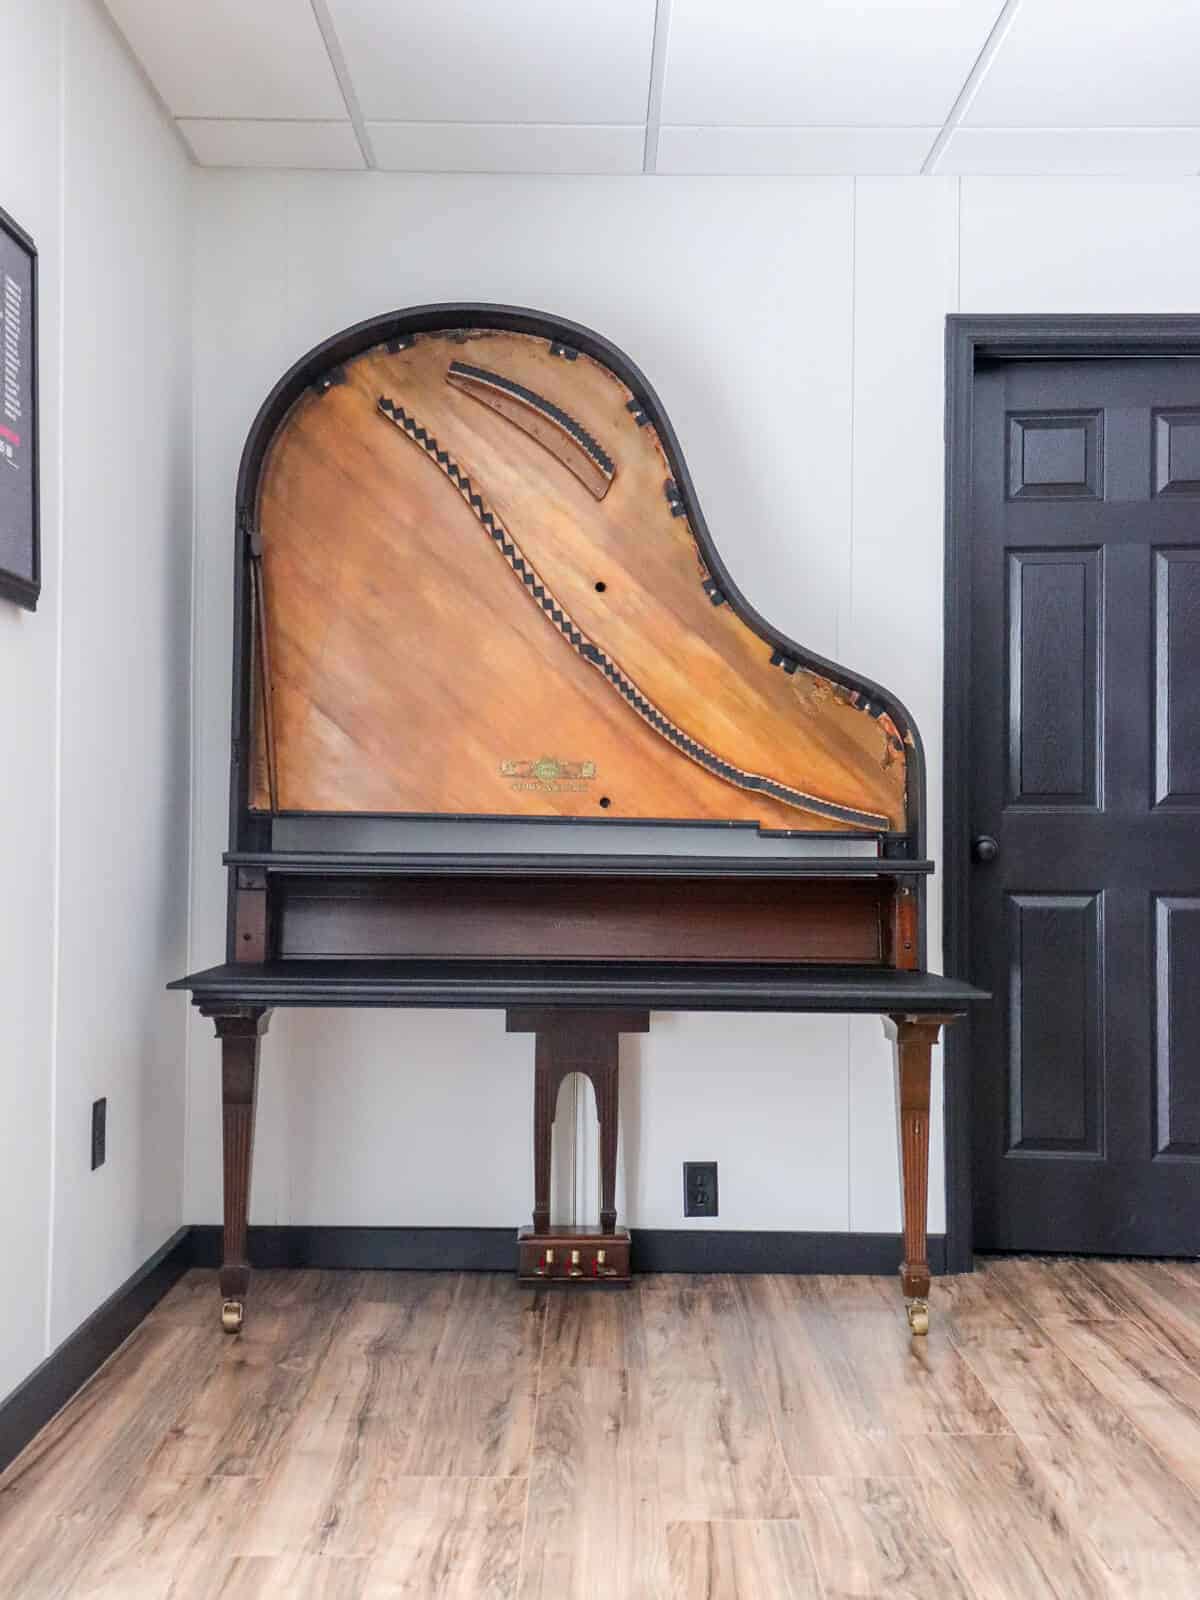 How We Made an Old Piano New Again